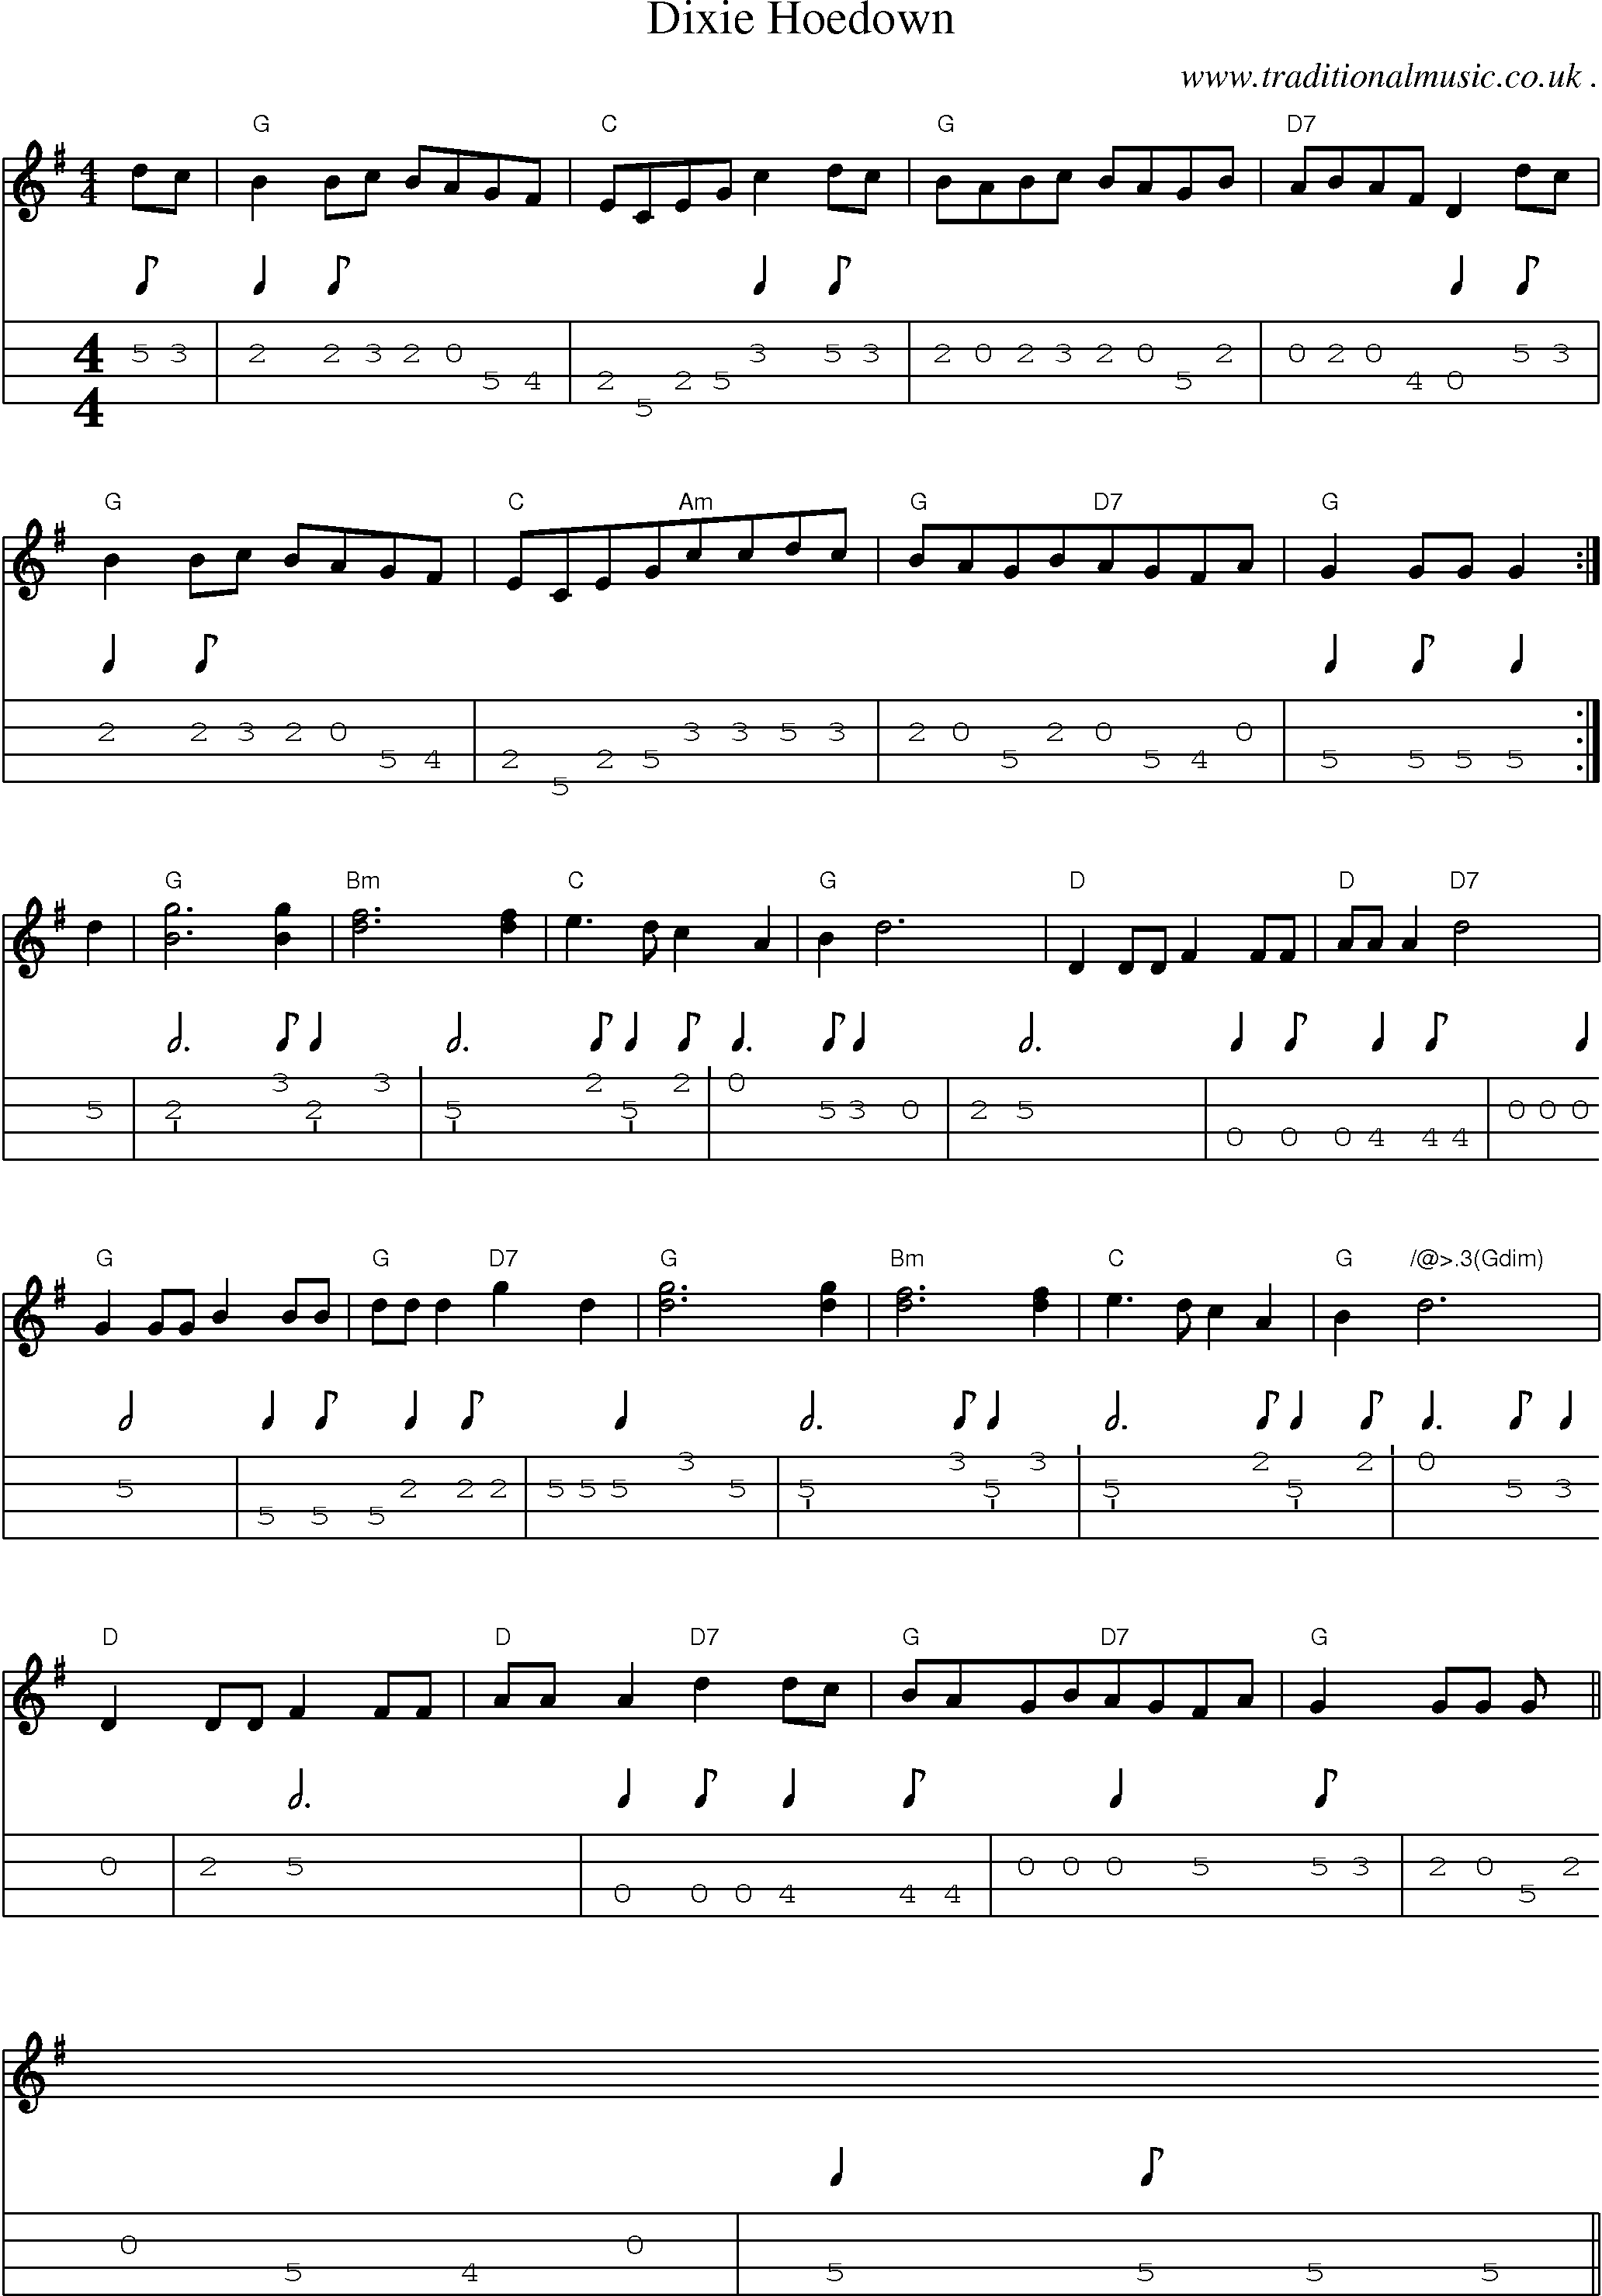 Sheet-Music and Mandolin Tabs for Dixie Hoedown